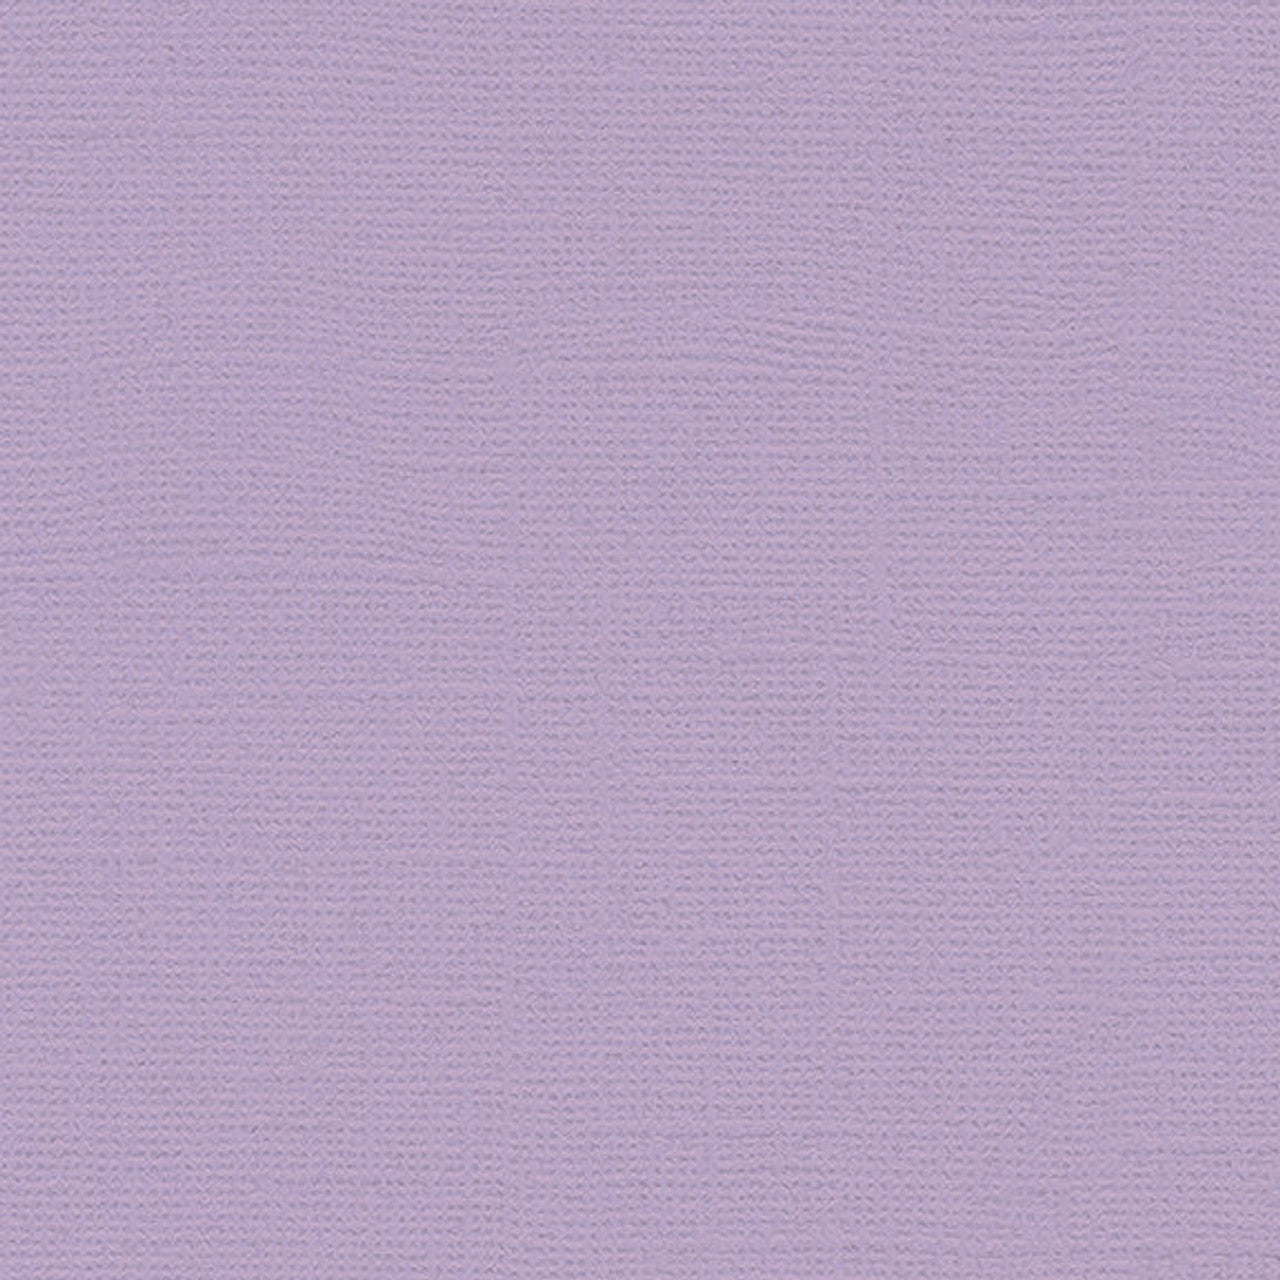 12x12 My Colors Cardstock - Lilac Mist